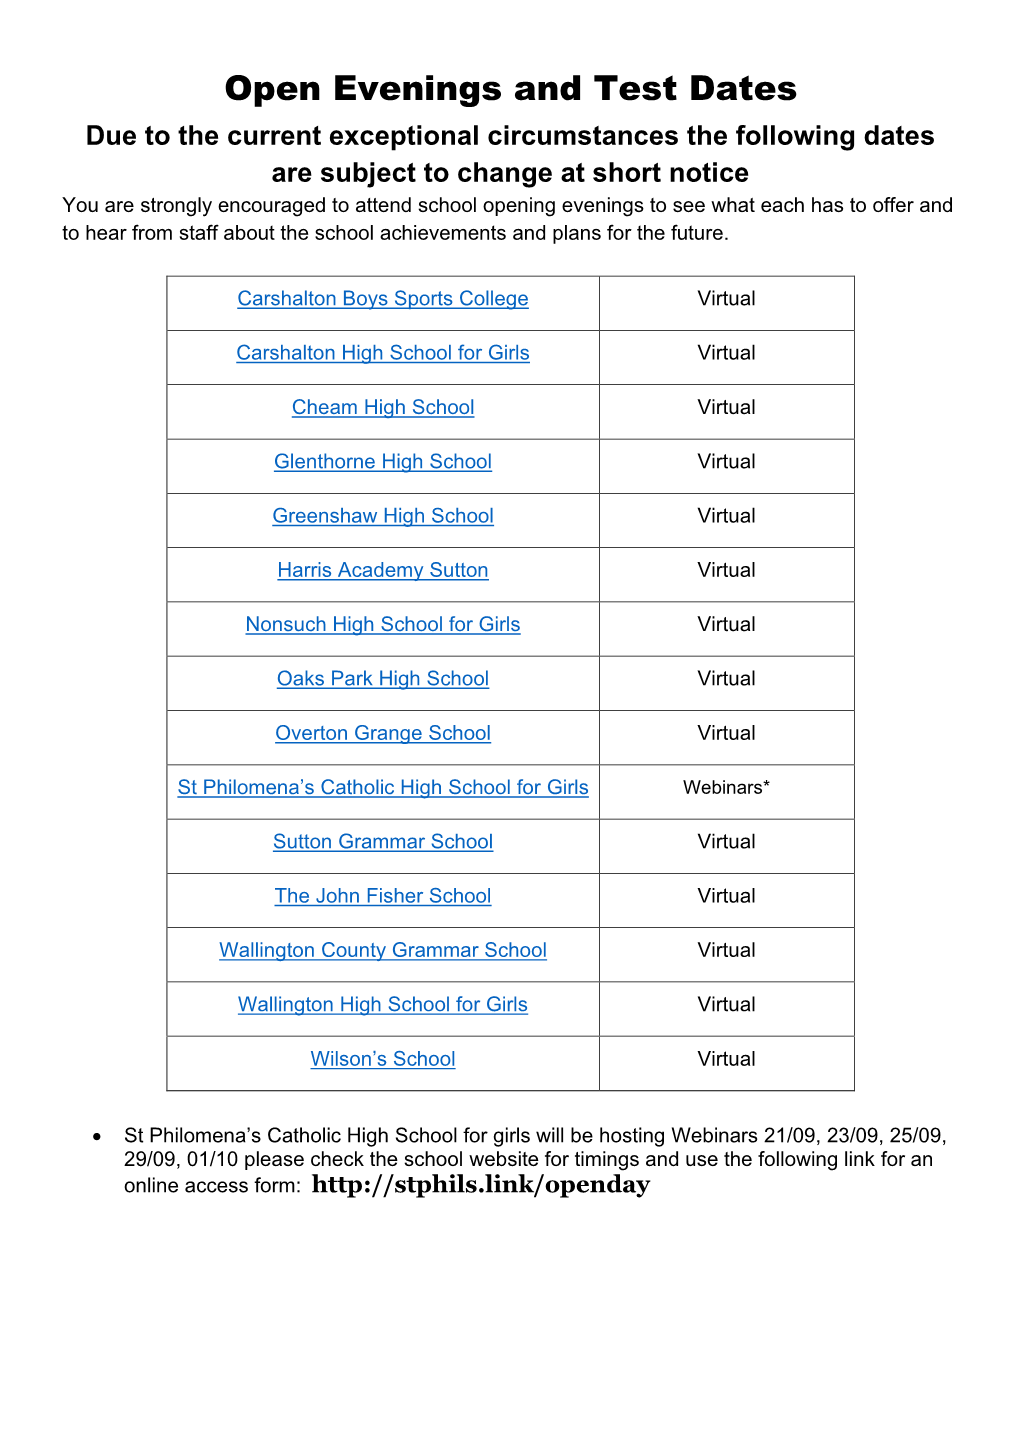 Downloadtransfer to Secondary School 2021 Open Evenings And